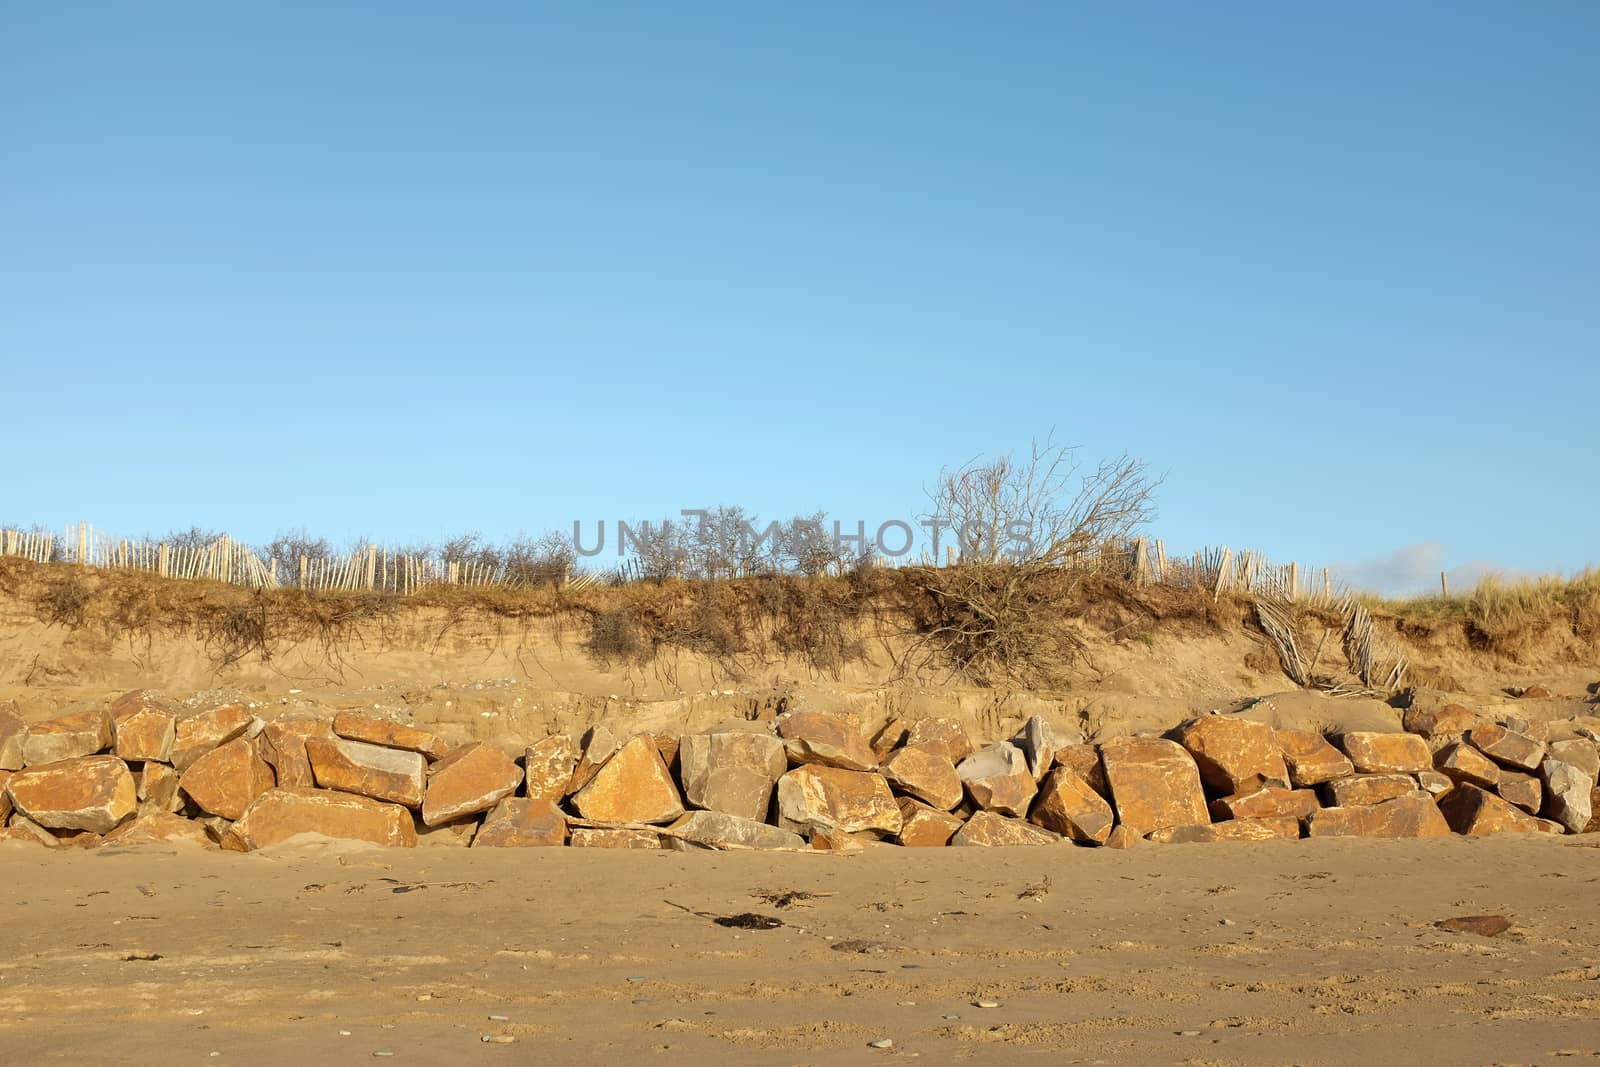 A sandy beach lead to a row of large rocks with an eroded sand bank in the rear and blue sky in the distance.